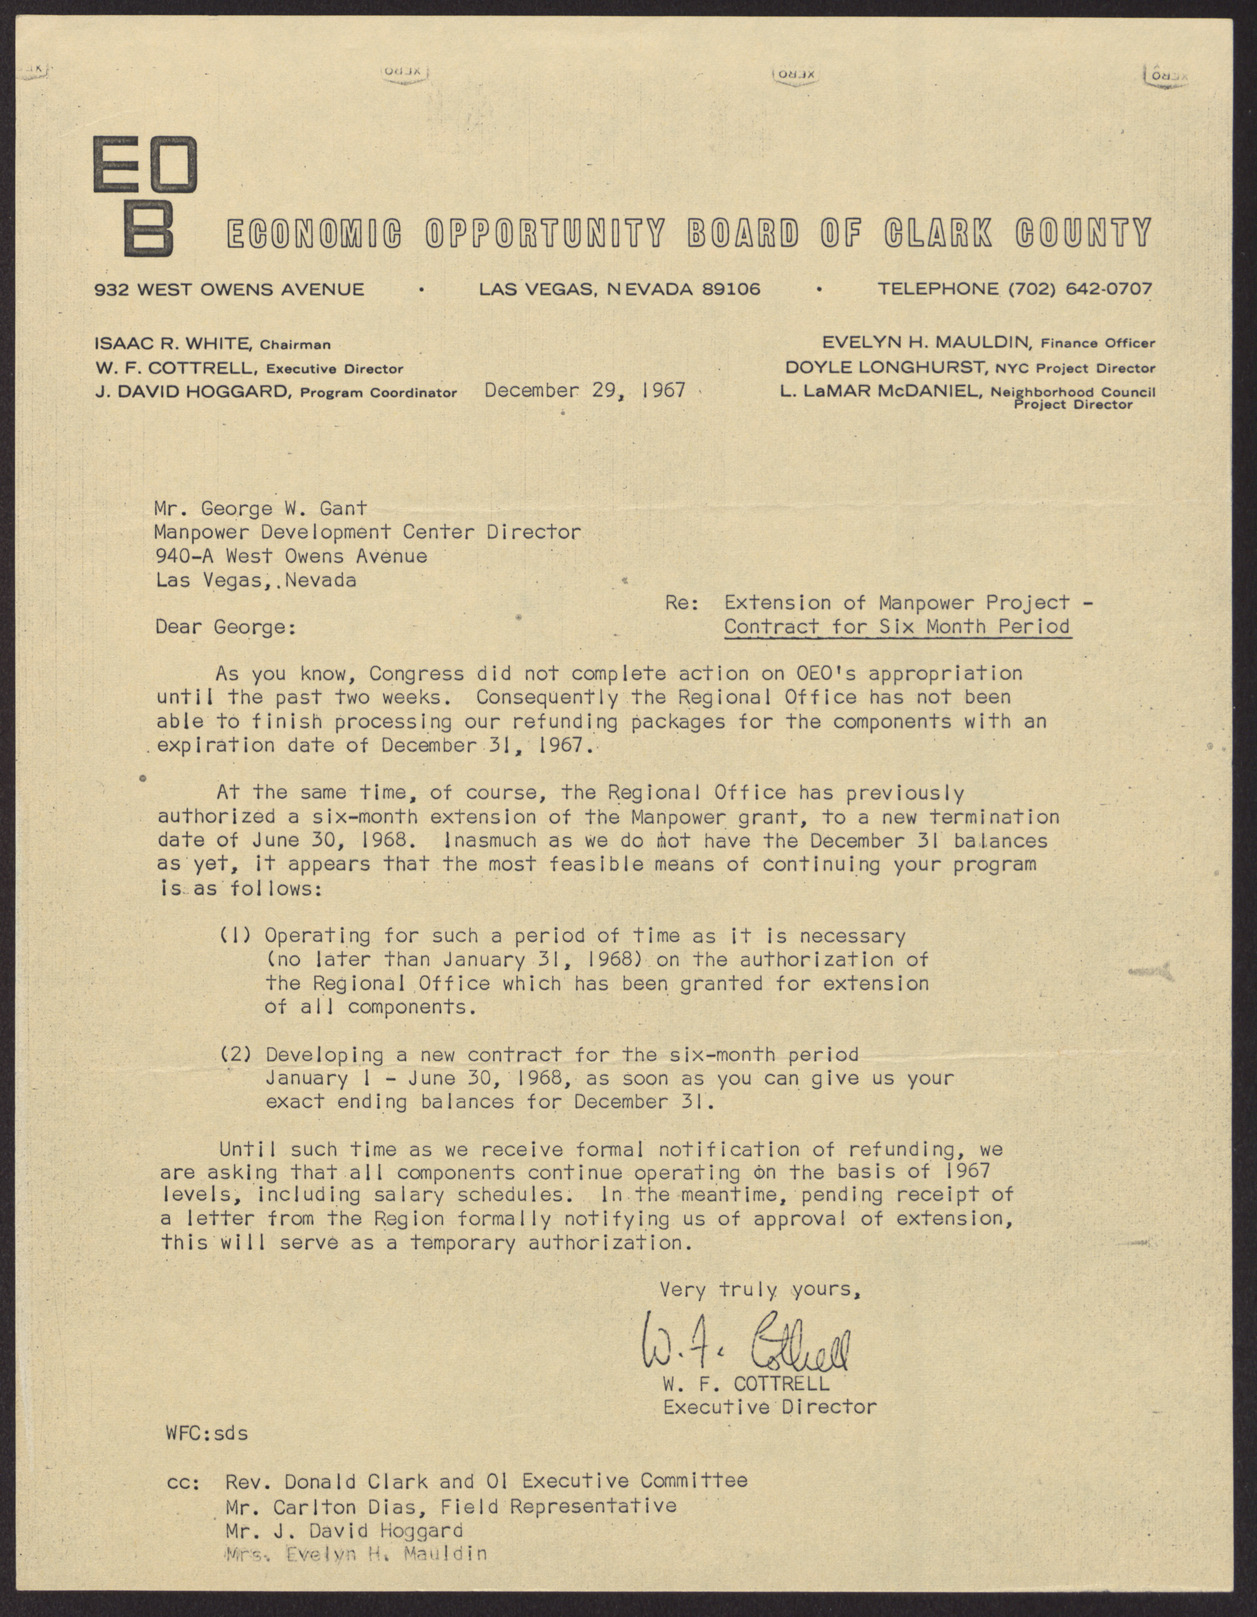 Letter to Mr. George W. Gant from W. F. Cottrell, December 29, 1967